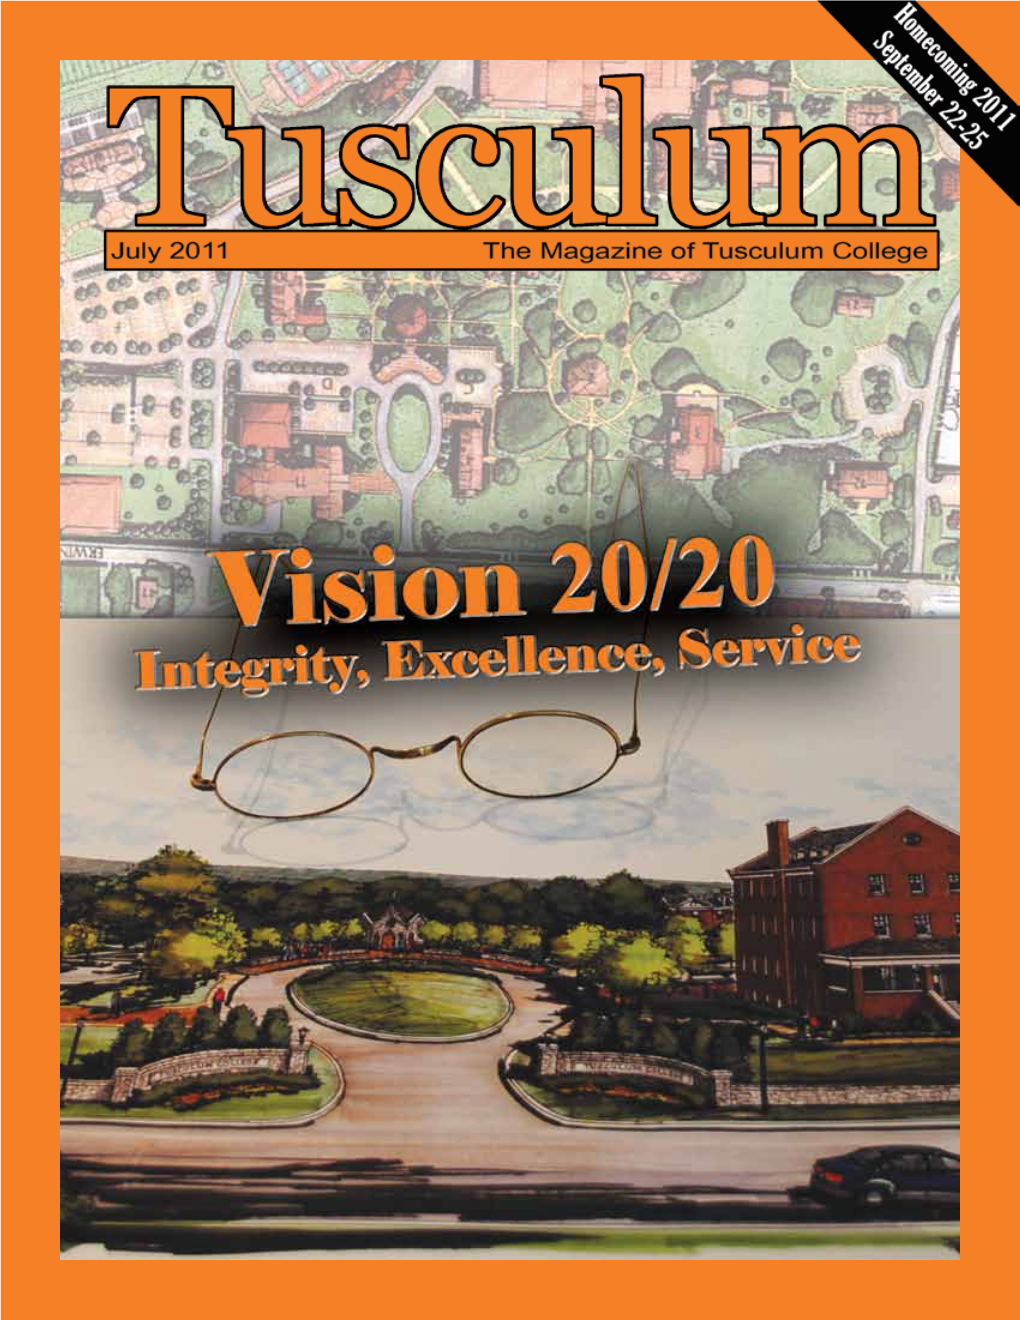 VISION 20/20 Moving Into a Third Century of Integrity, Excellence and Service